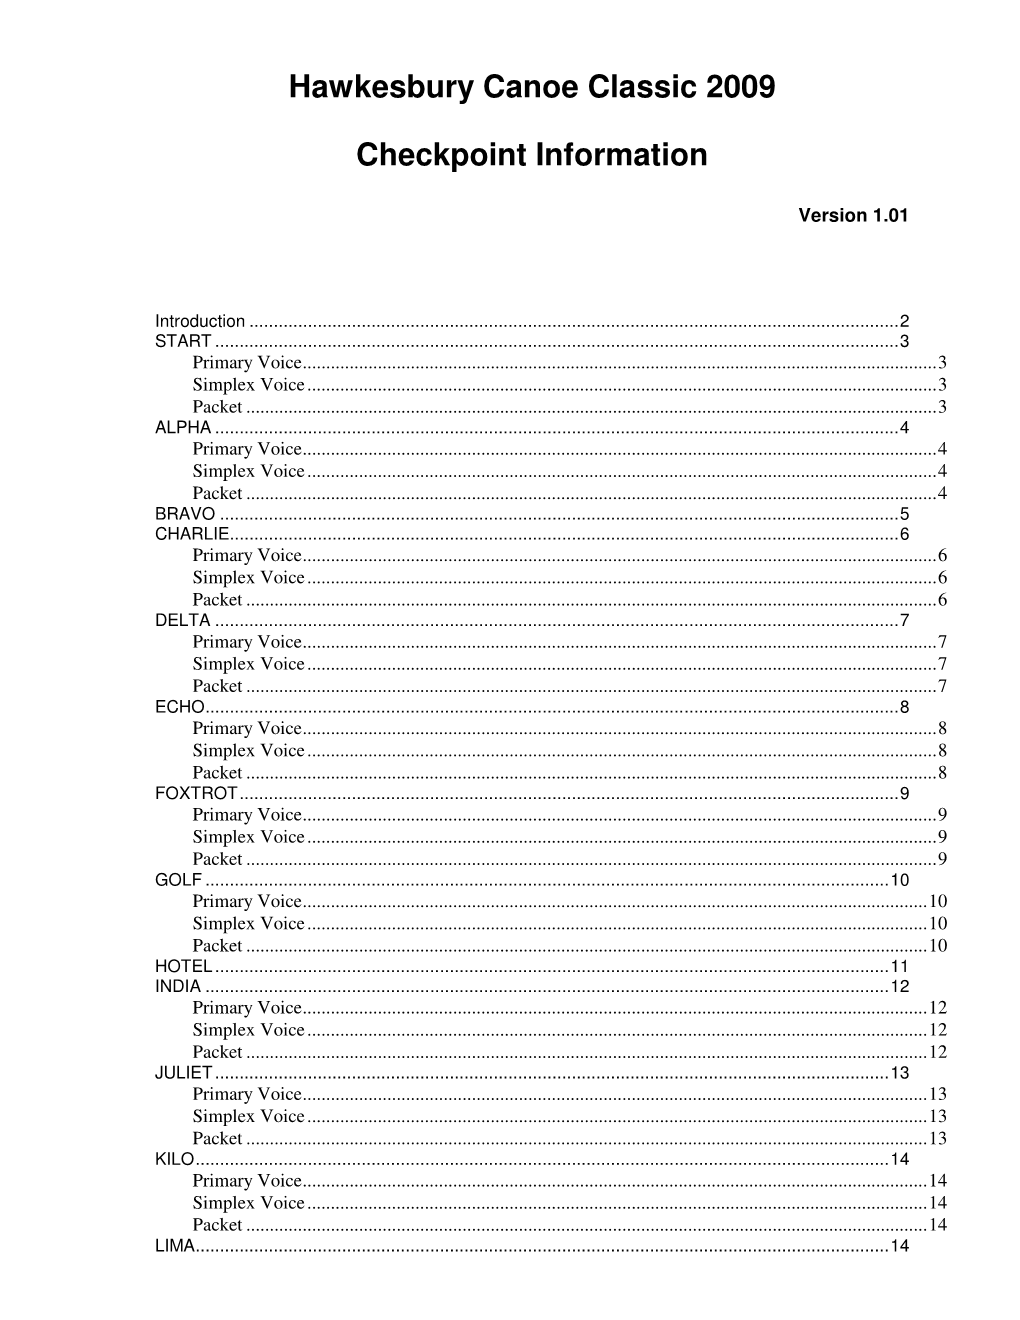 Hawkesbury Canoe Classic 2009 Checkpoint Information